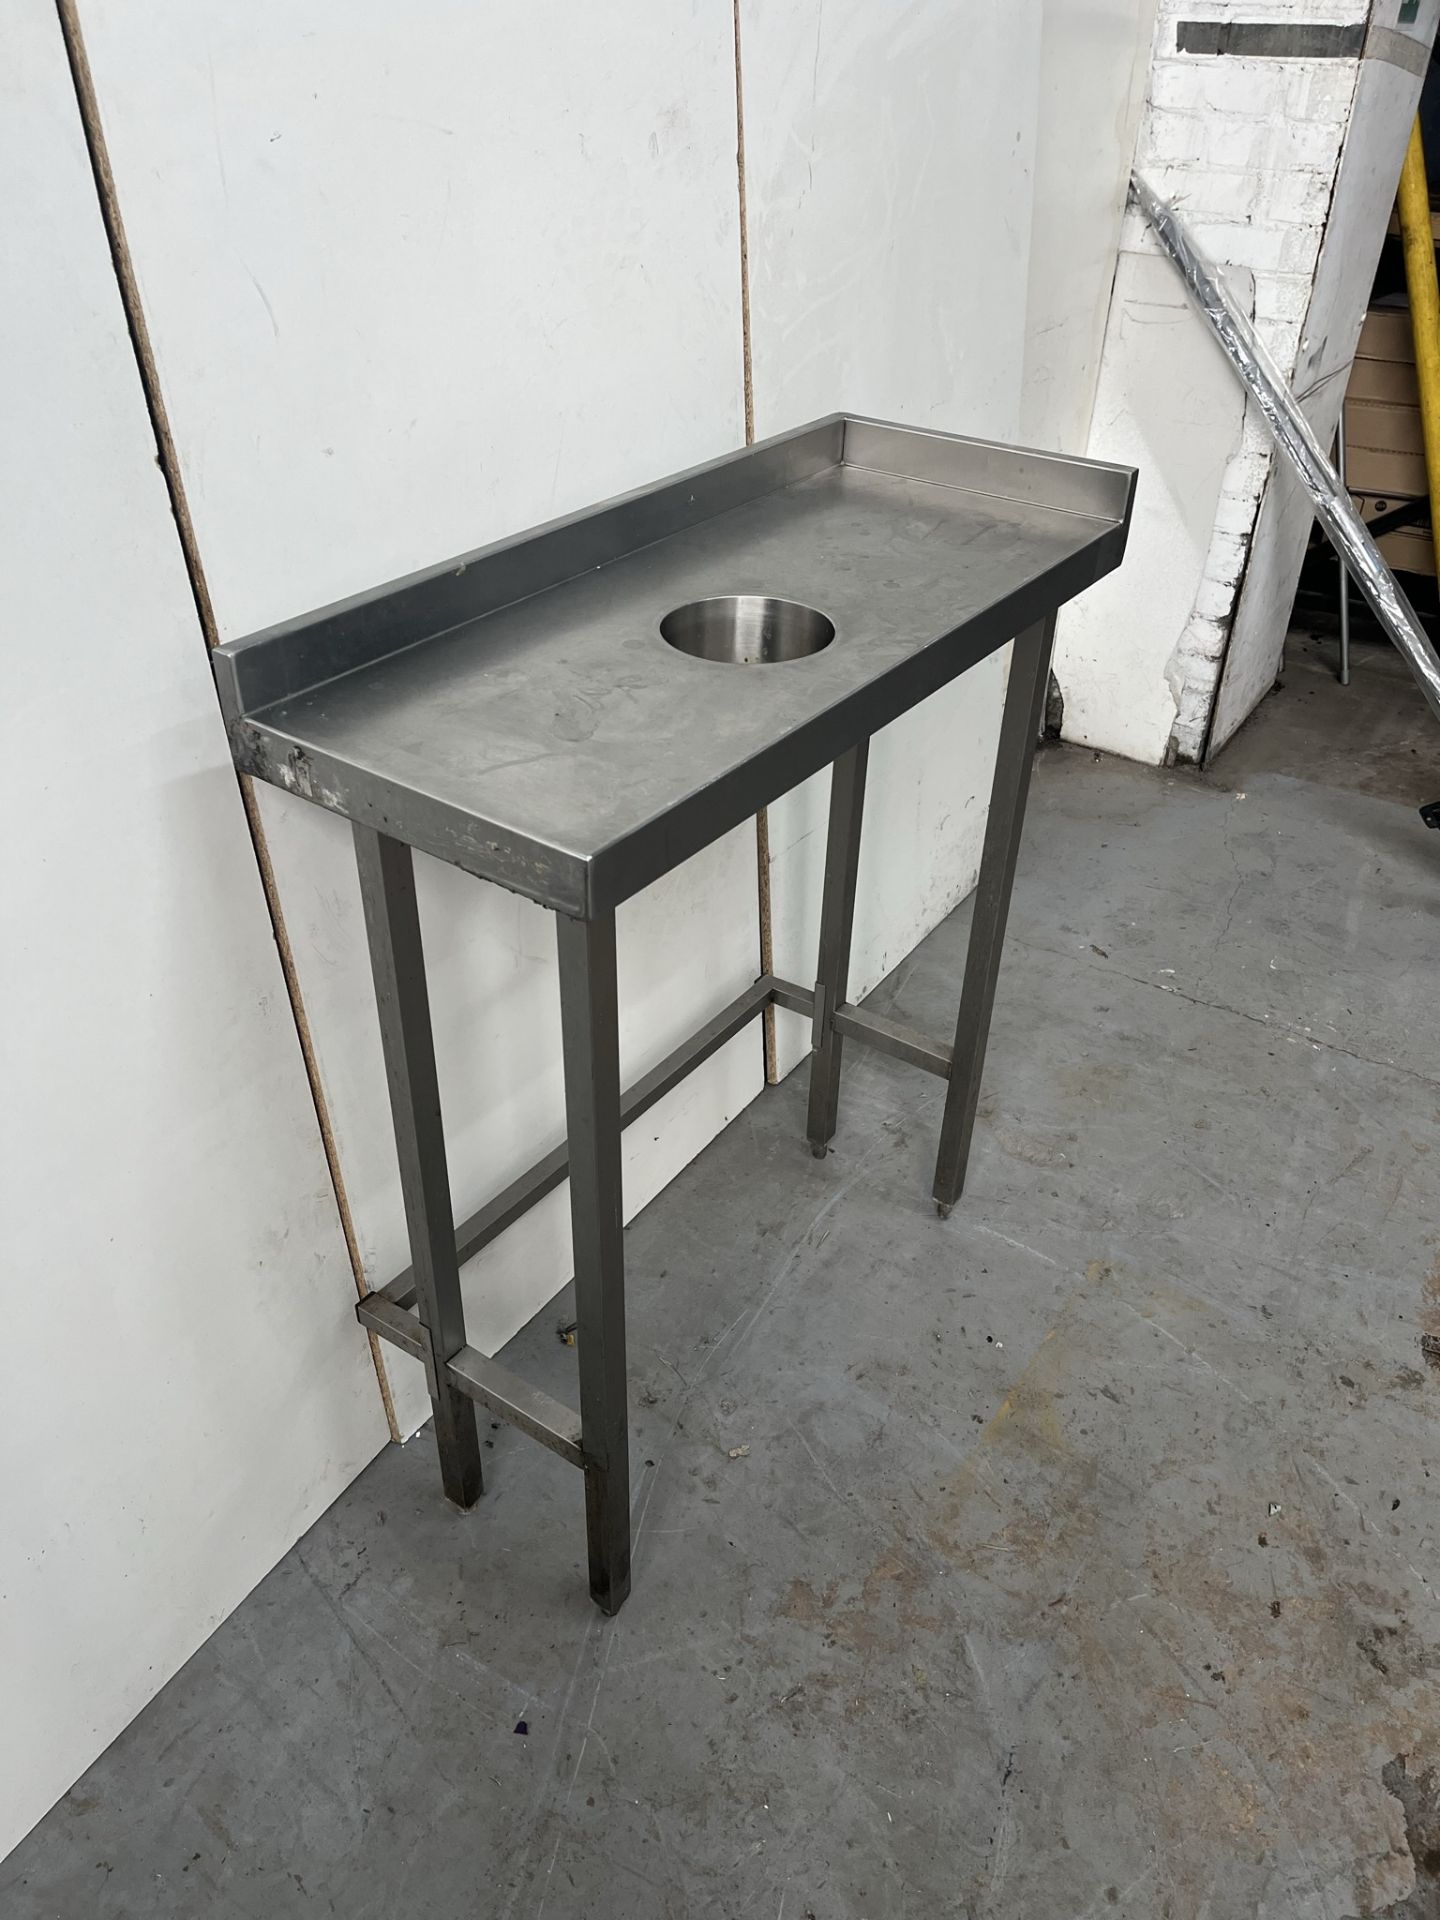 850mm Stainless Steel Catering Preperation Table With Waste Disposal Hole - Image 3 of 7